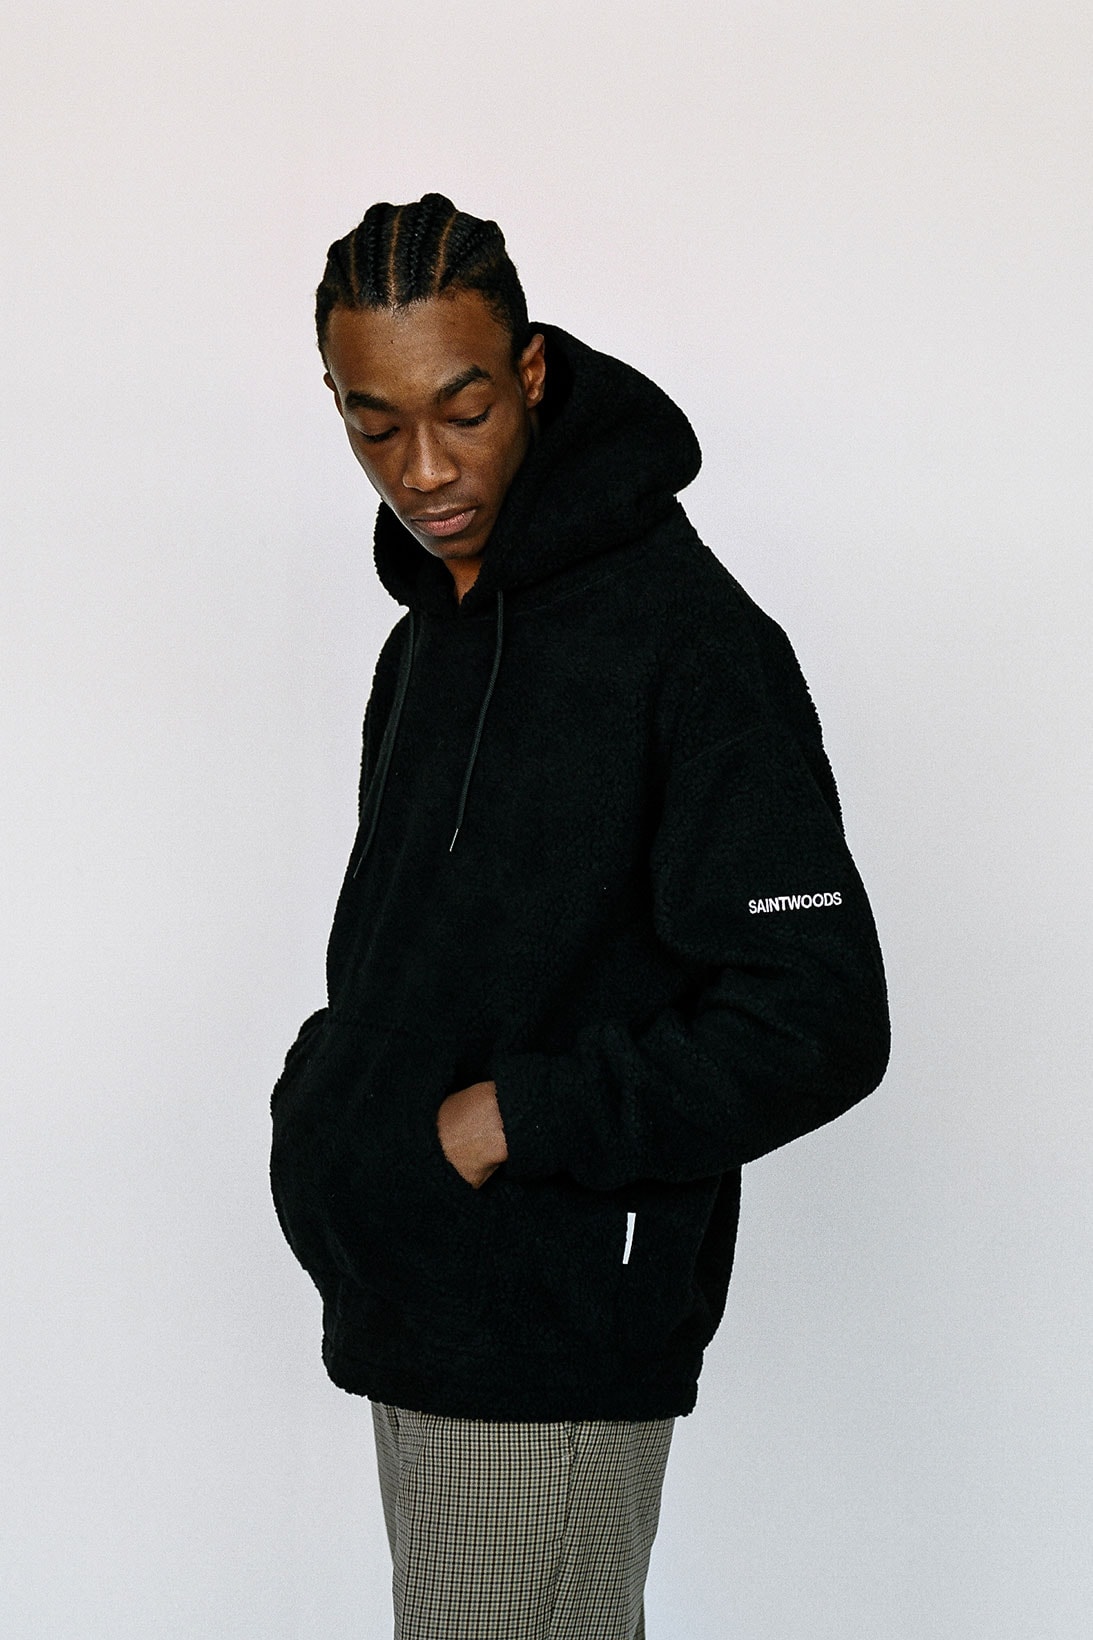 saintwoods sw 011 collection black hoodie